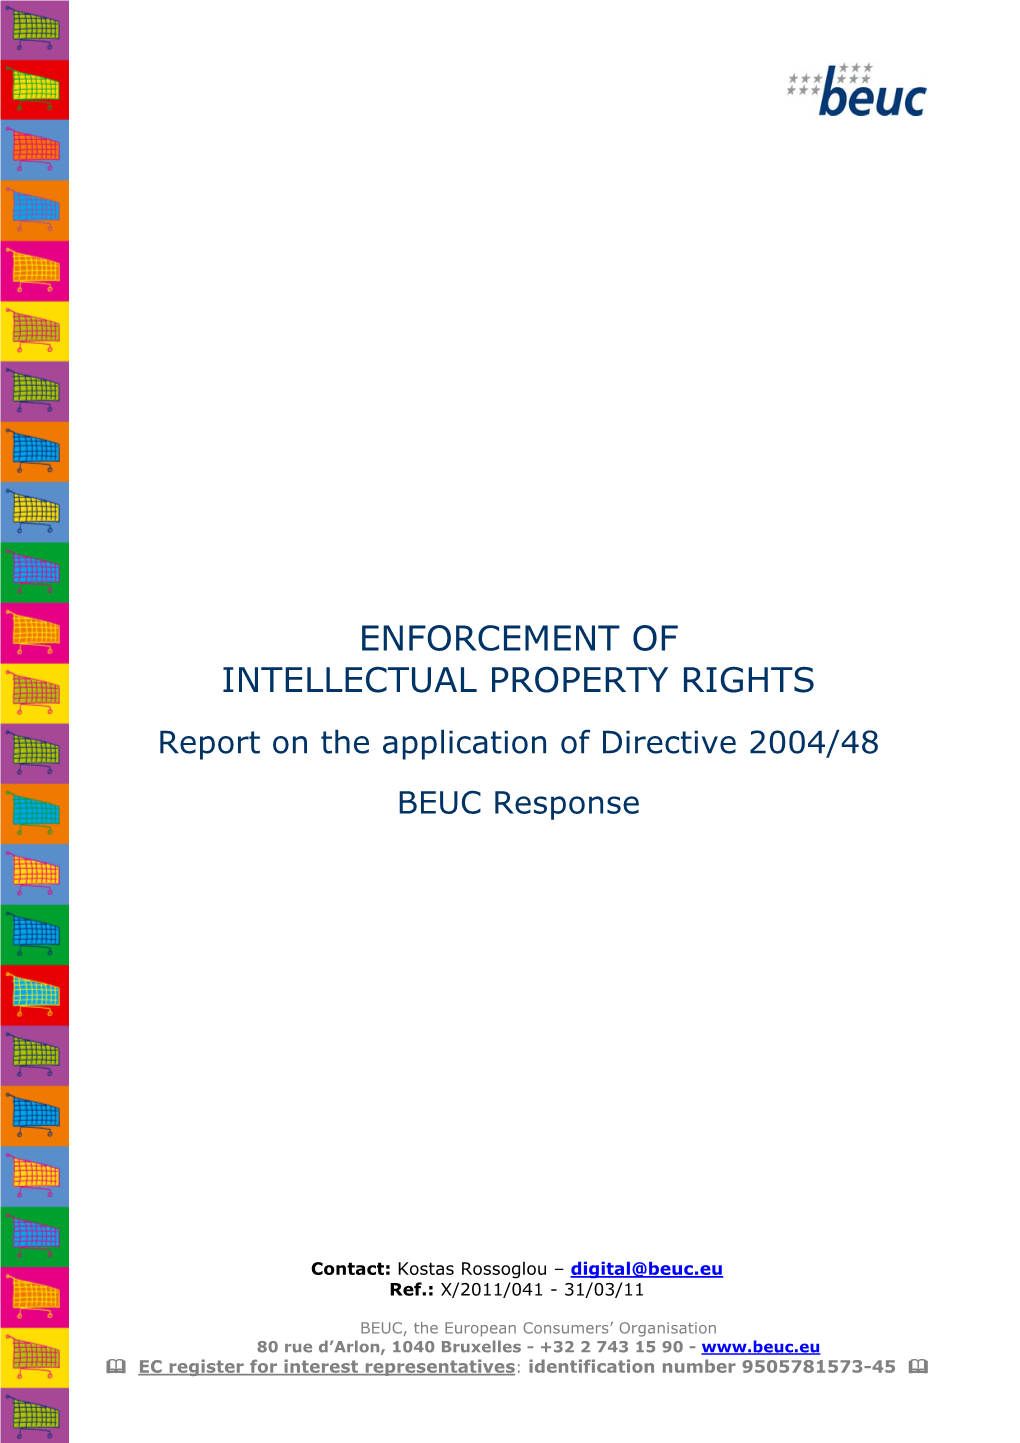 Enforcement of Intellectual Property Rights